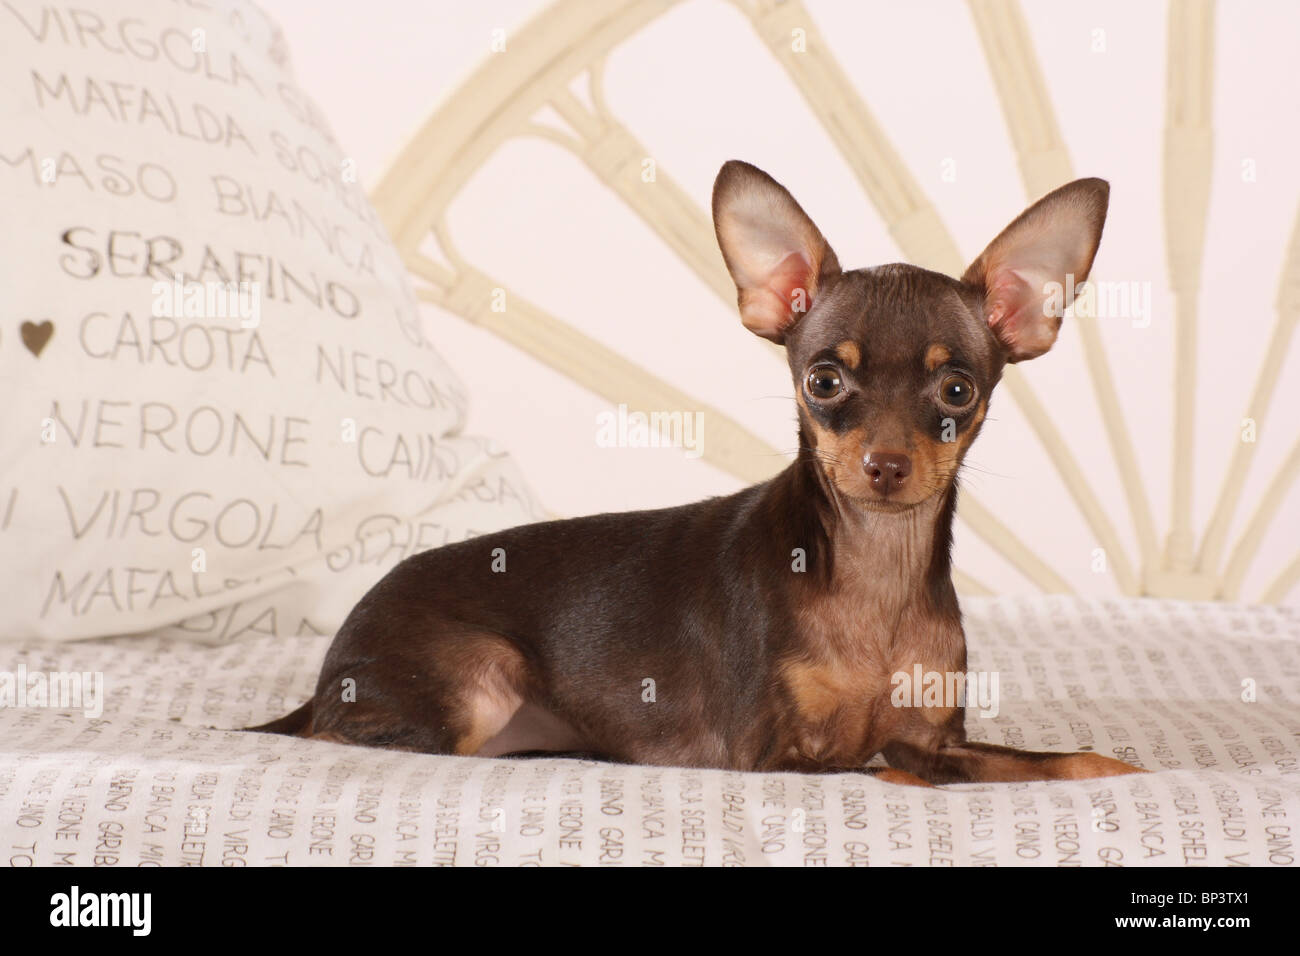 Russian Toy Terrier dog - lying on a bed Stock Photo